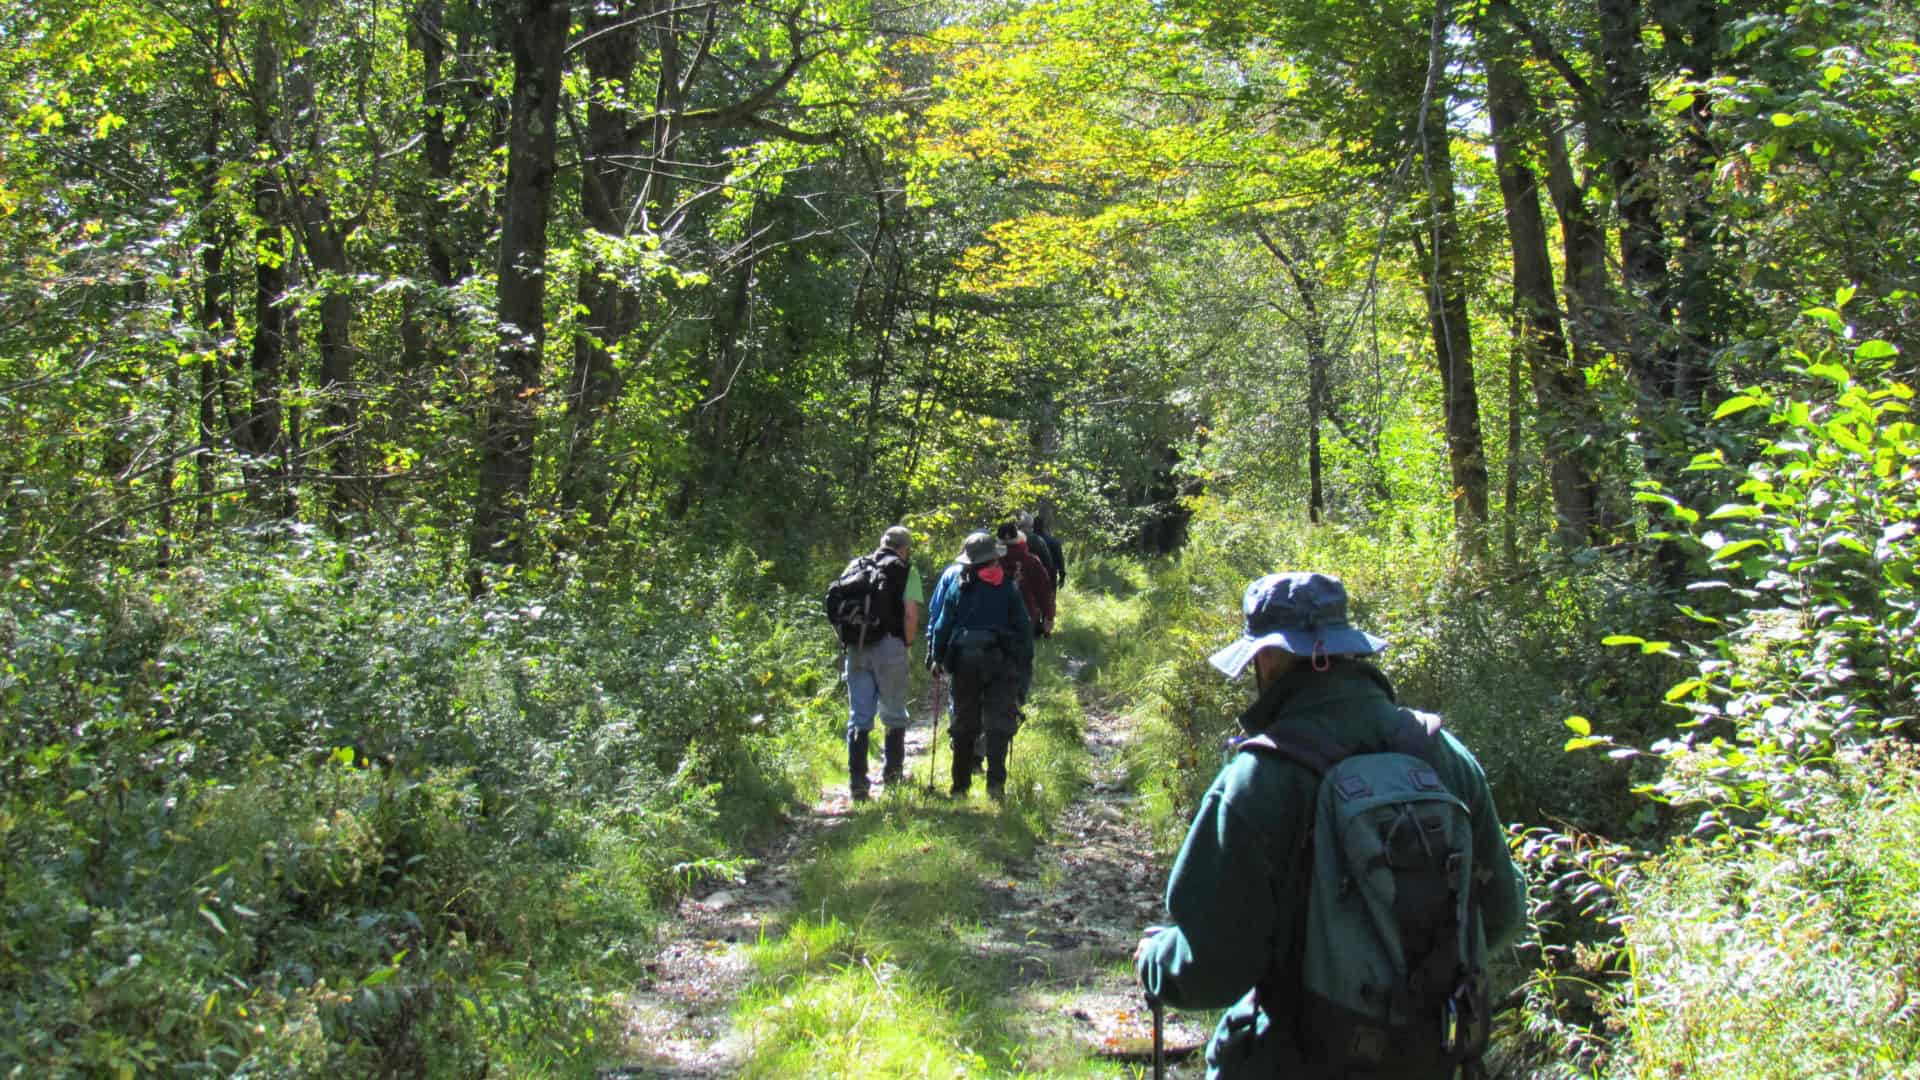 Tamarack Hollow Nature Center leads hikes on central Berkshire Trails and through boreal forest along the ridge in Savoy and Windsor.